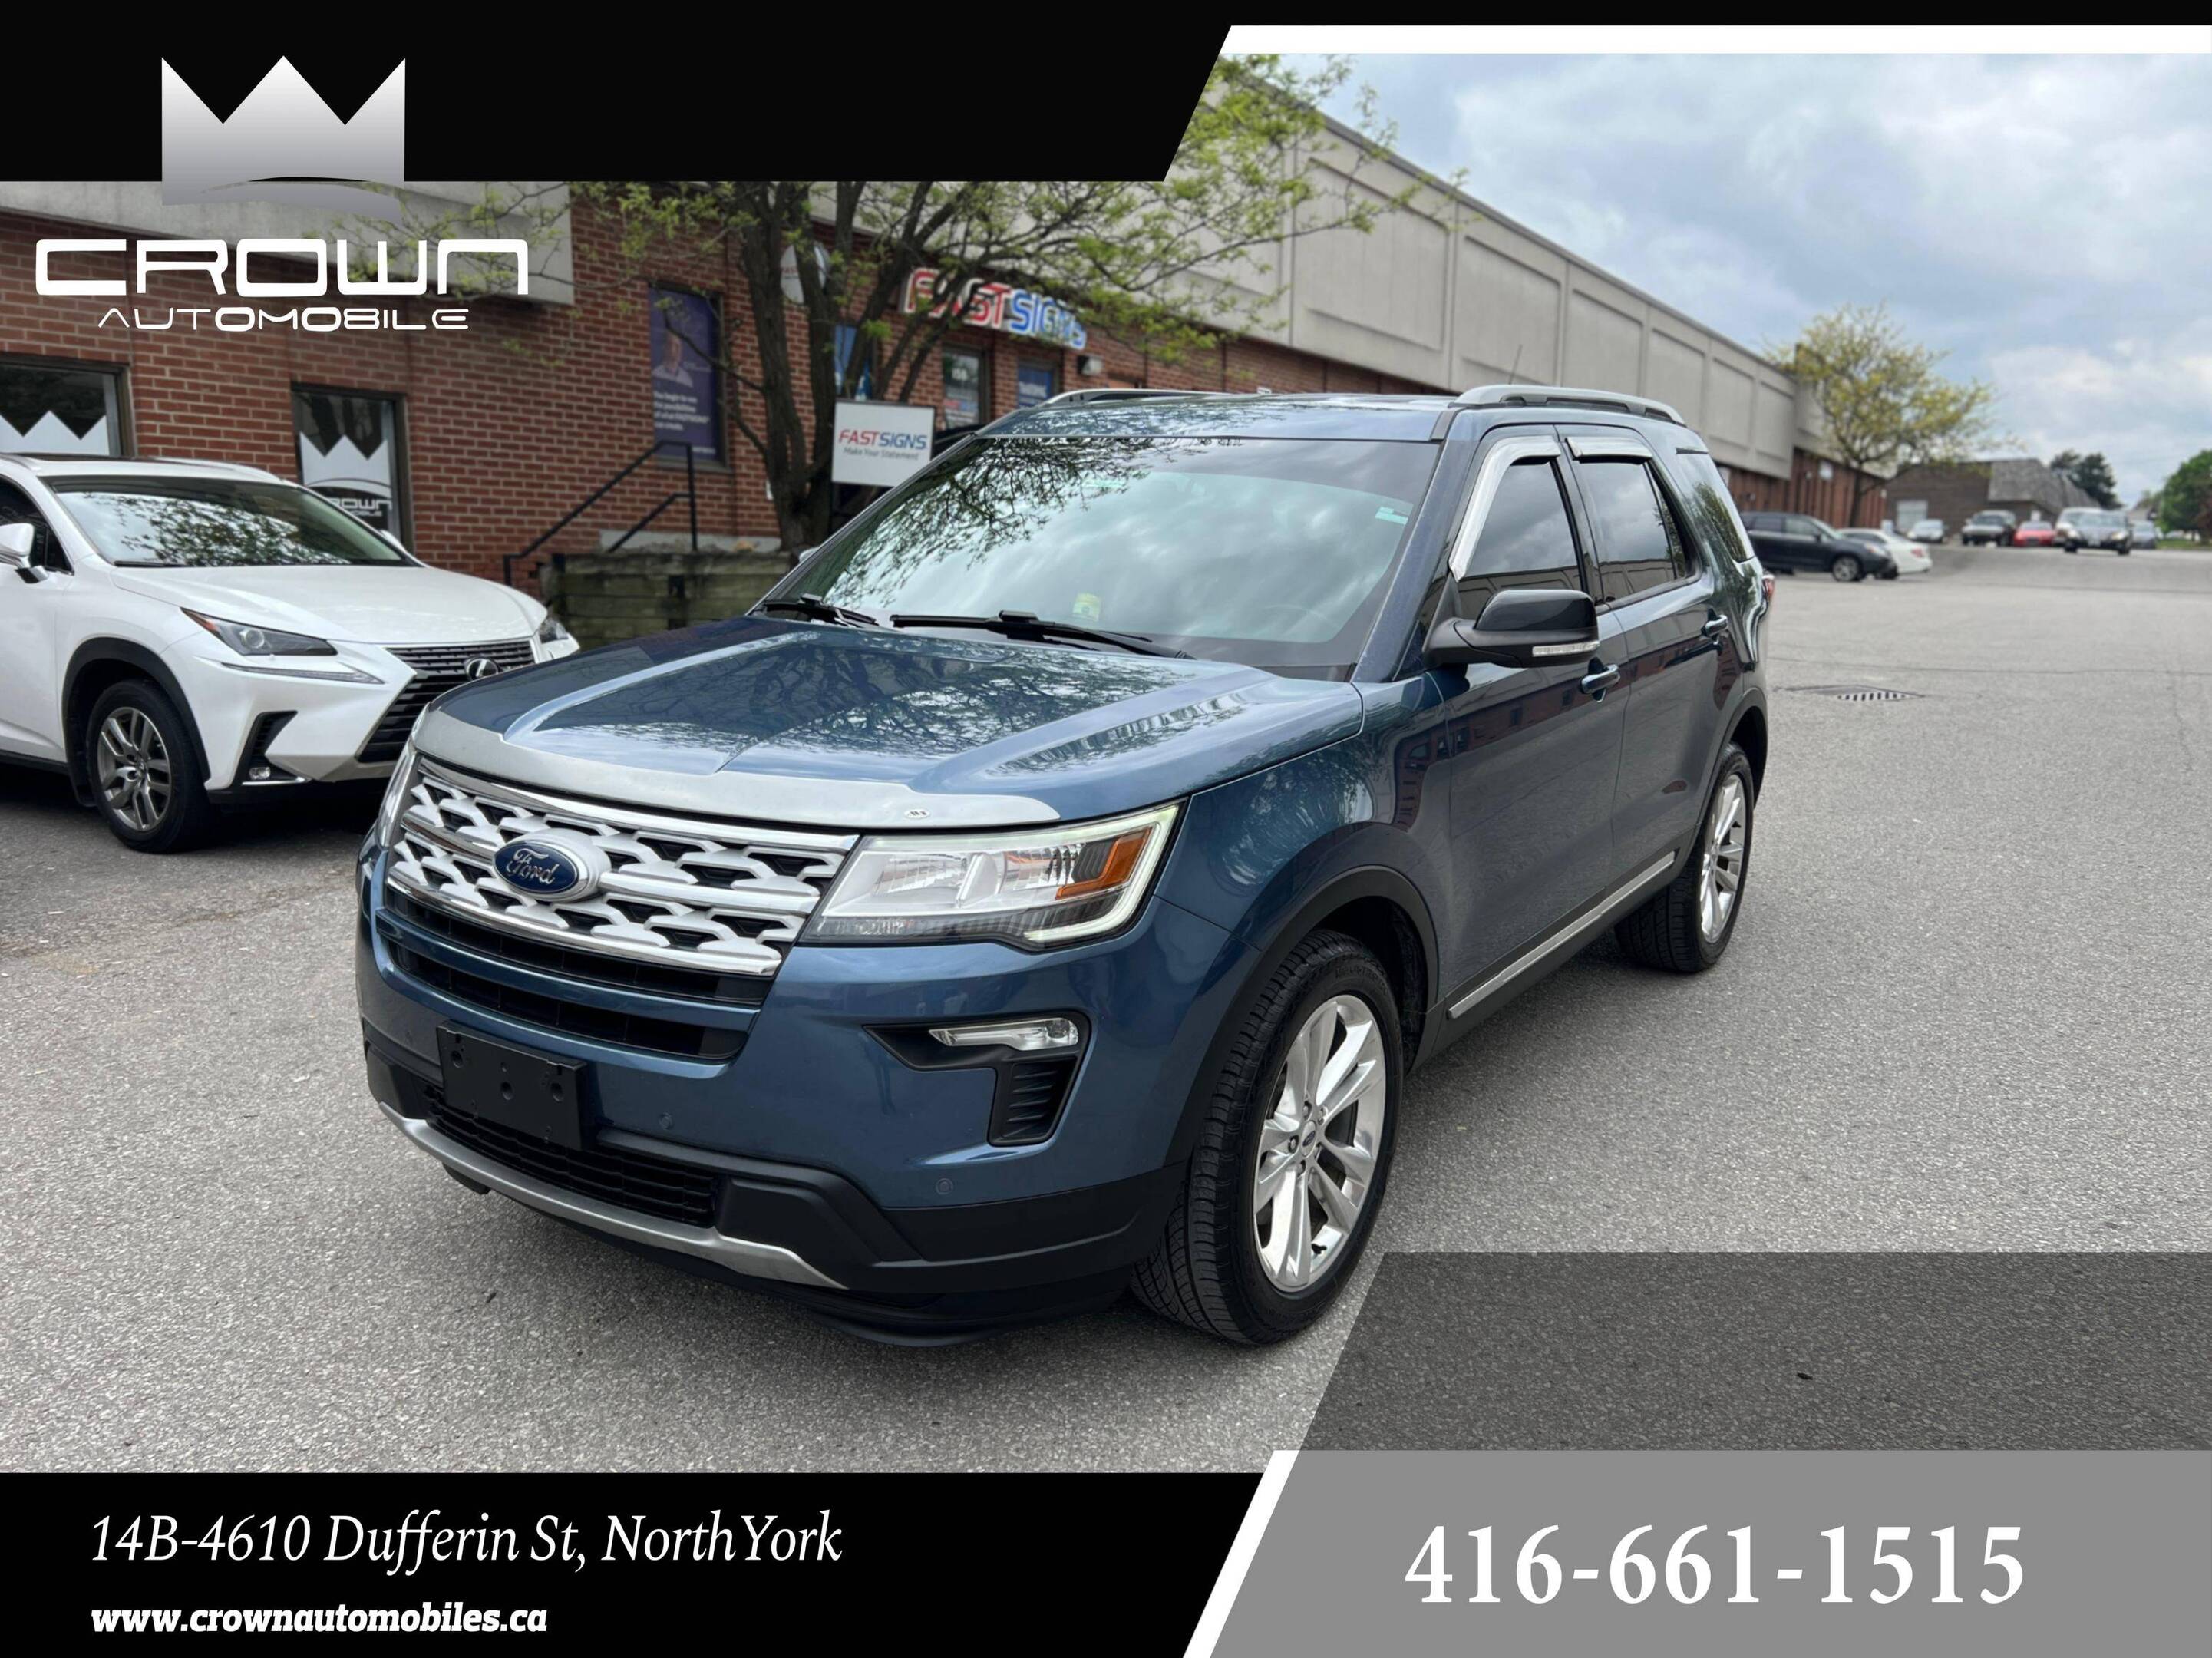 2018 Ford Explorer XLT 4WD, 7 SEATER, NO ACCIDENT, LEATHER SEATS